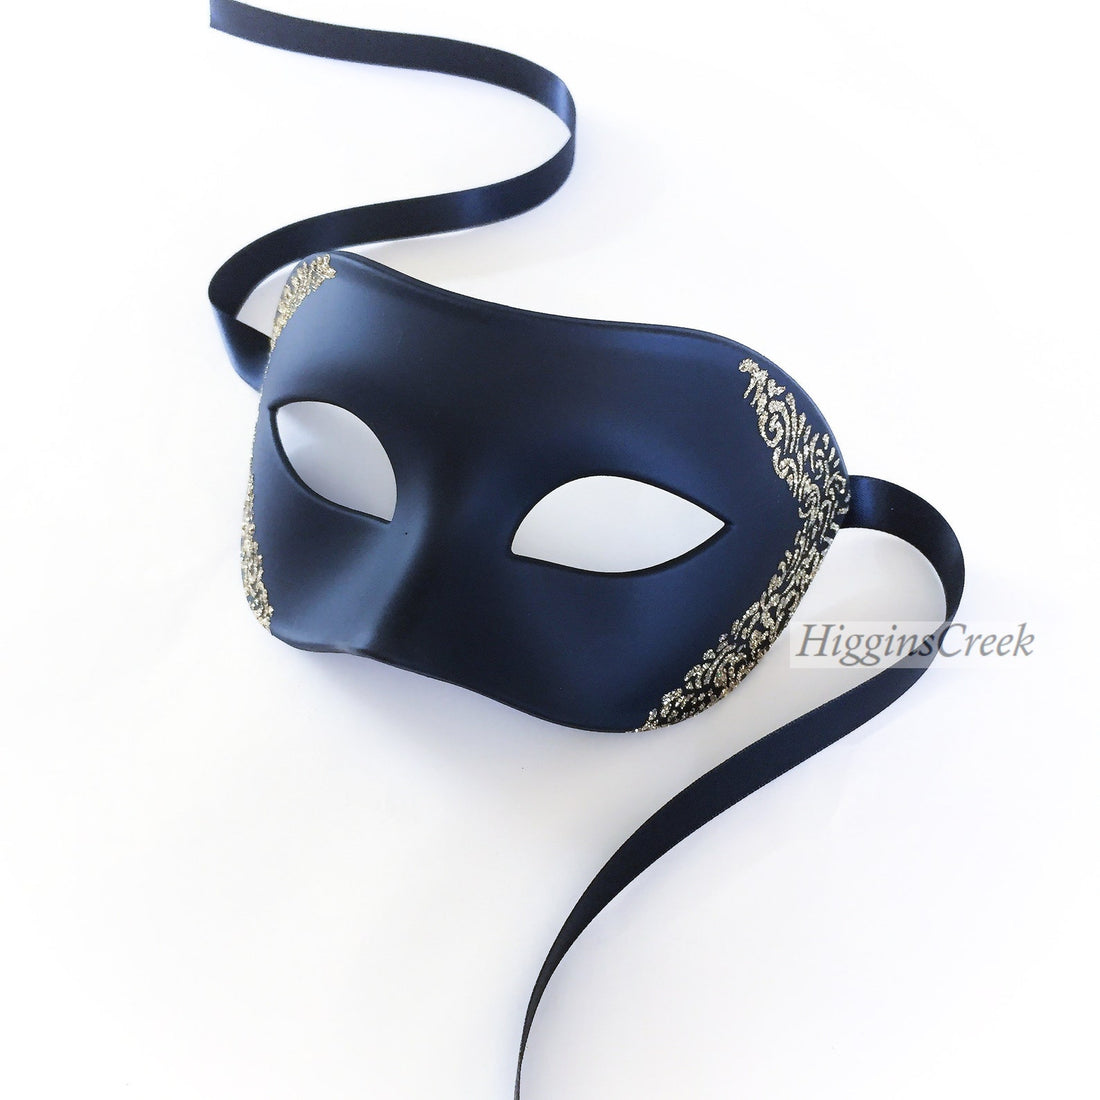 Mens masquerade mask in Venetian style in black with gold shimmer sides for sale.